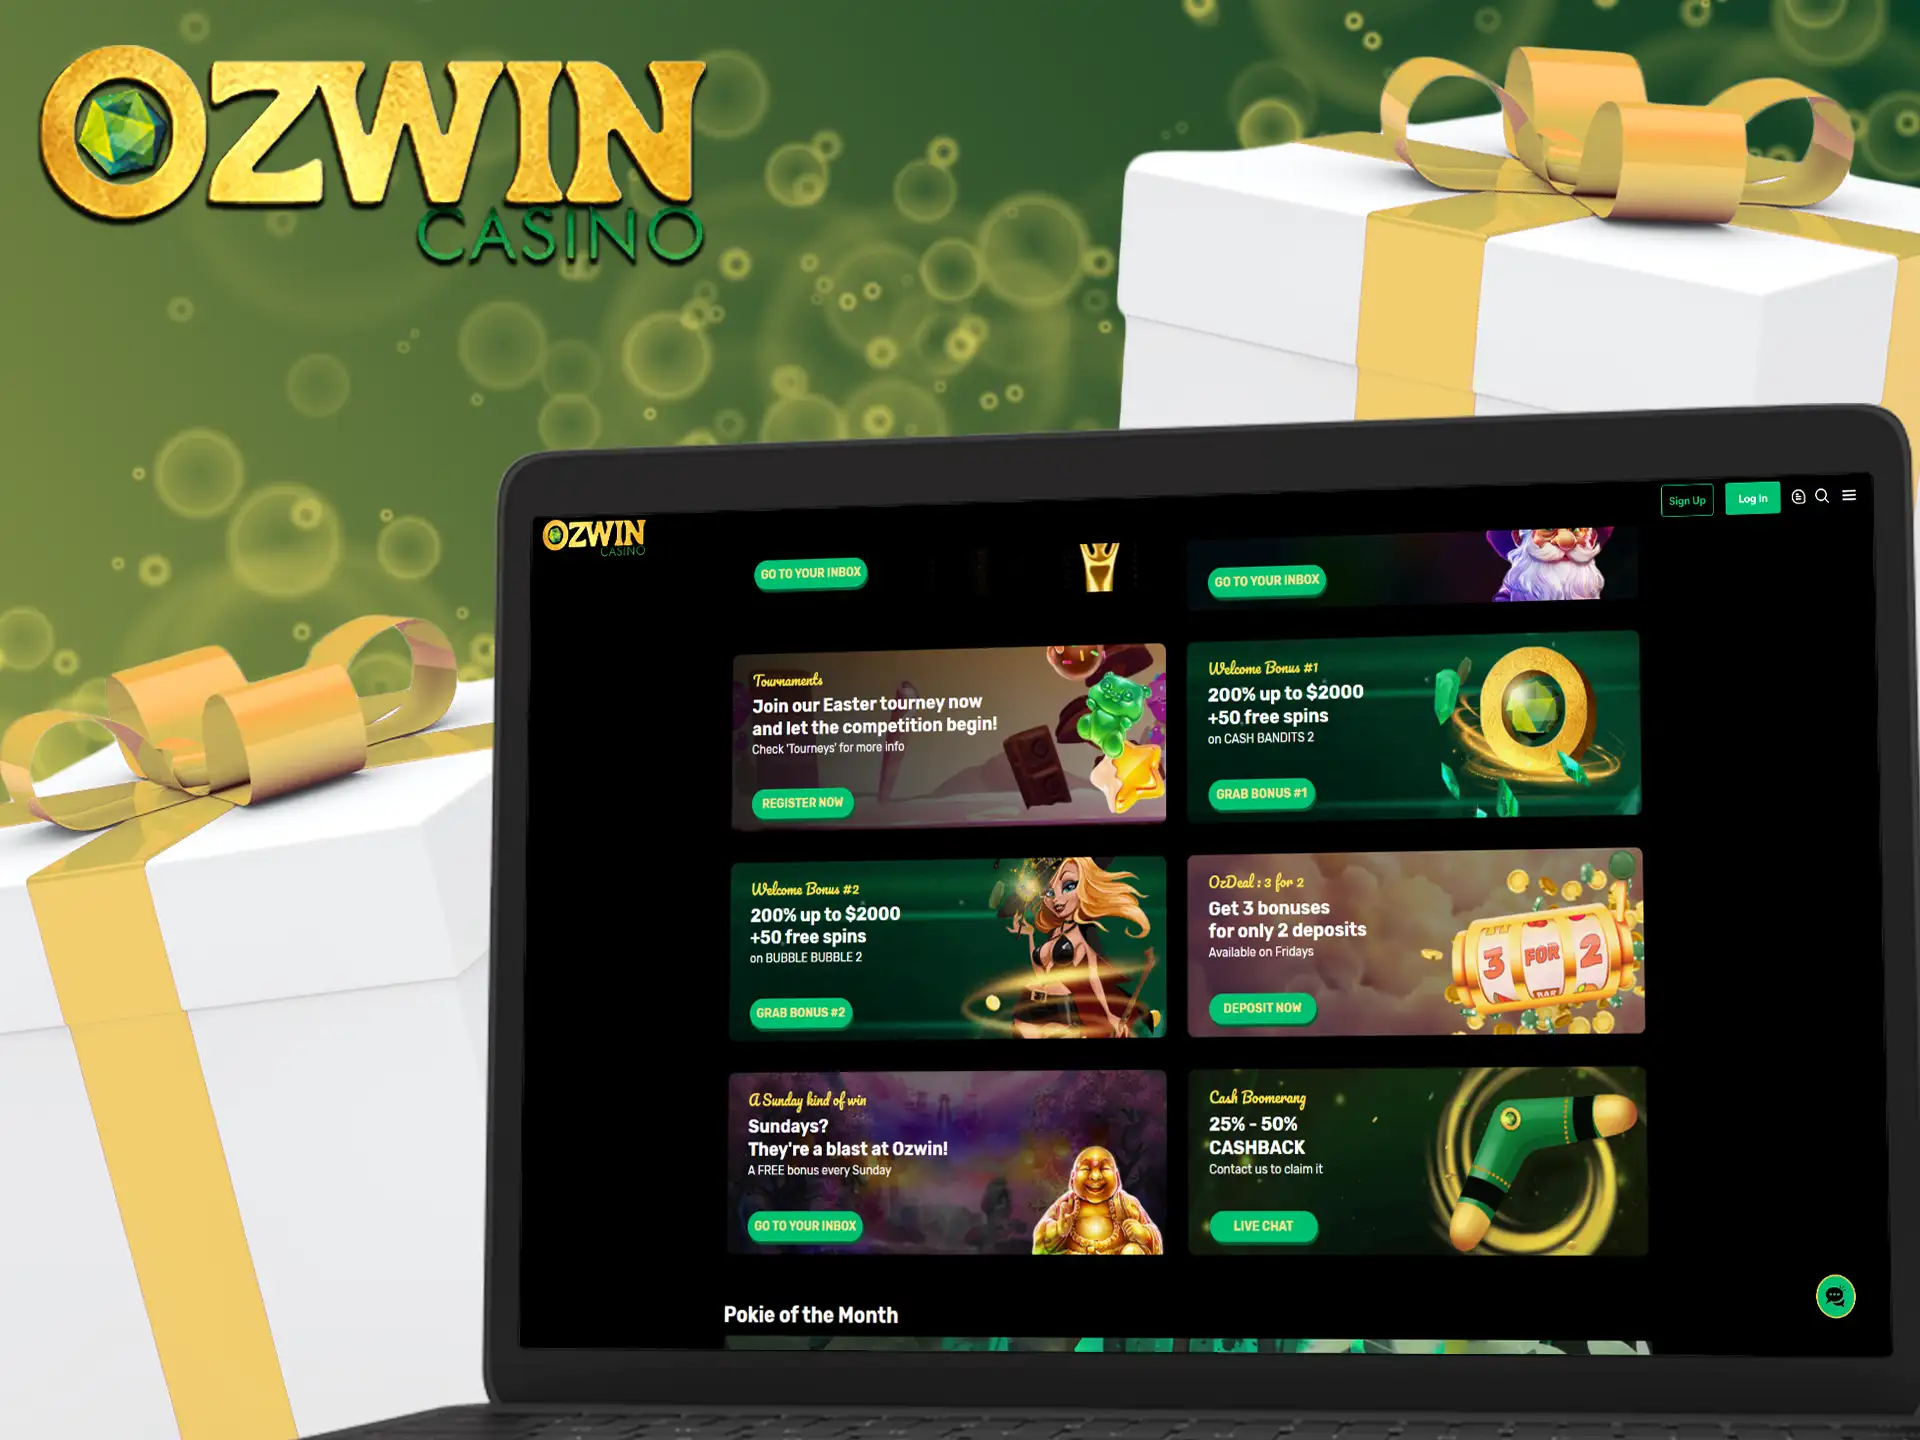 Ozwin doesn't offer sports betting bonuses yet, because we haven't launched that section.